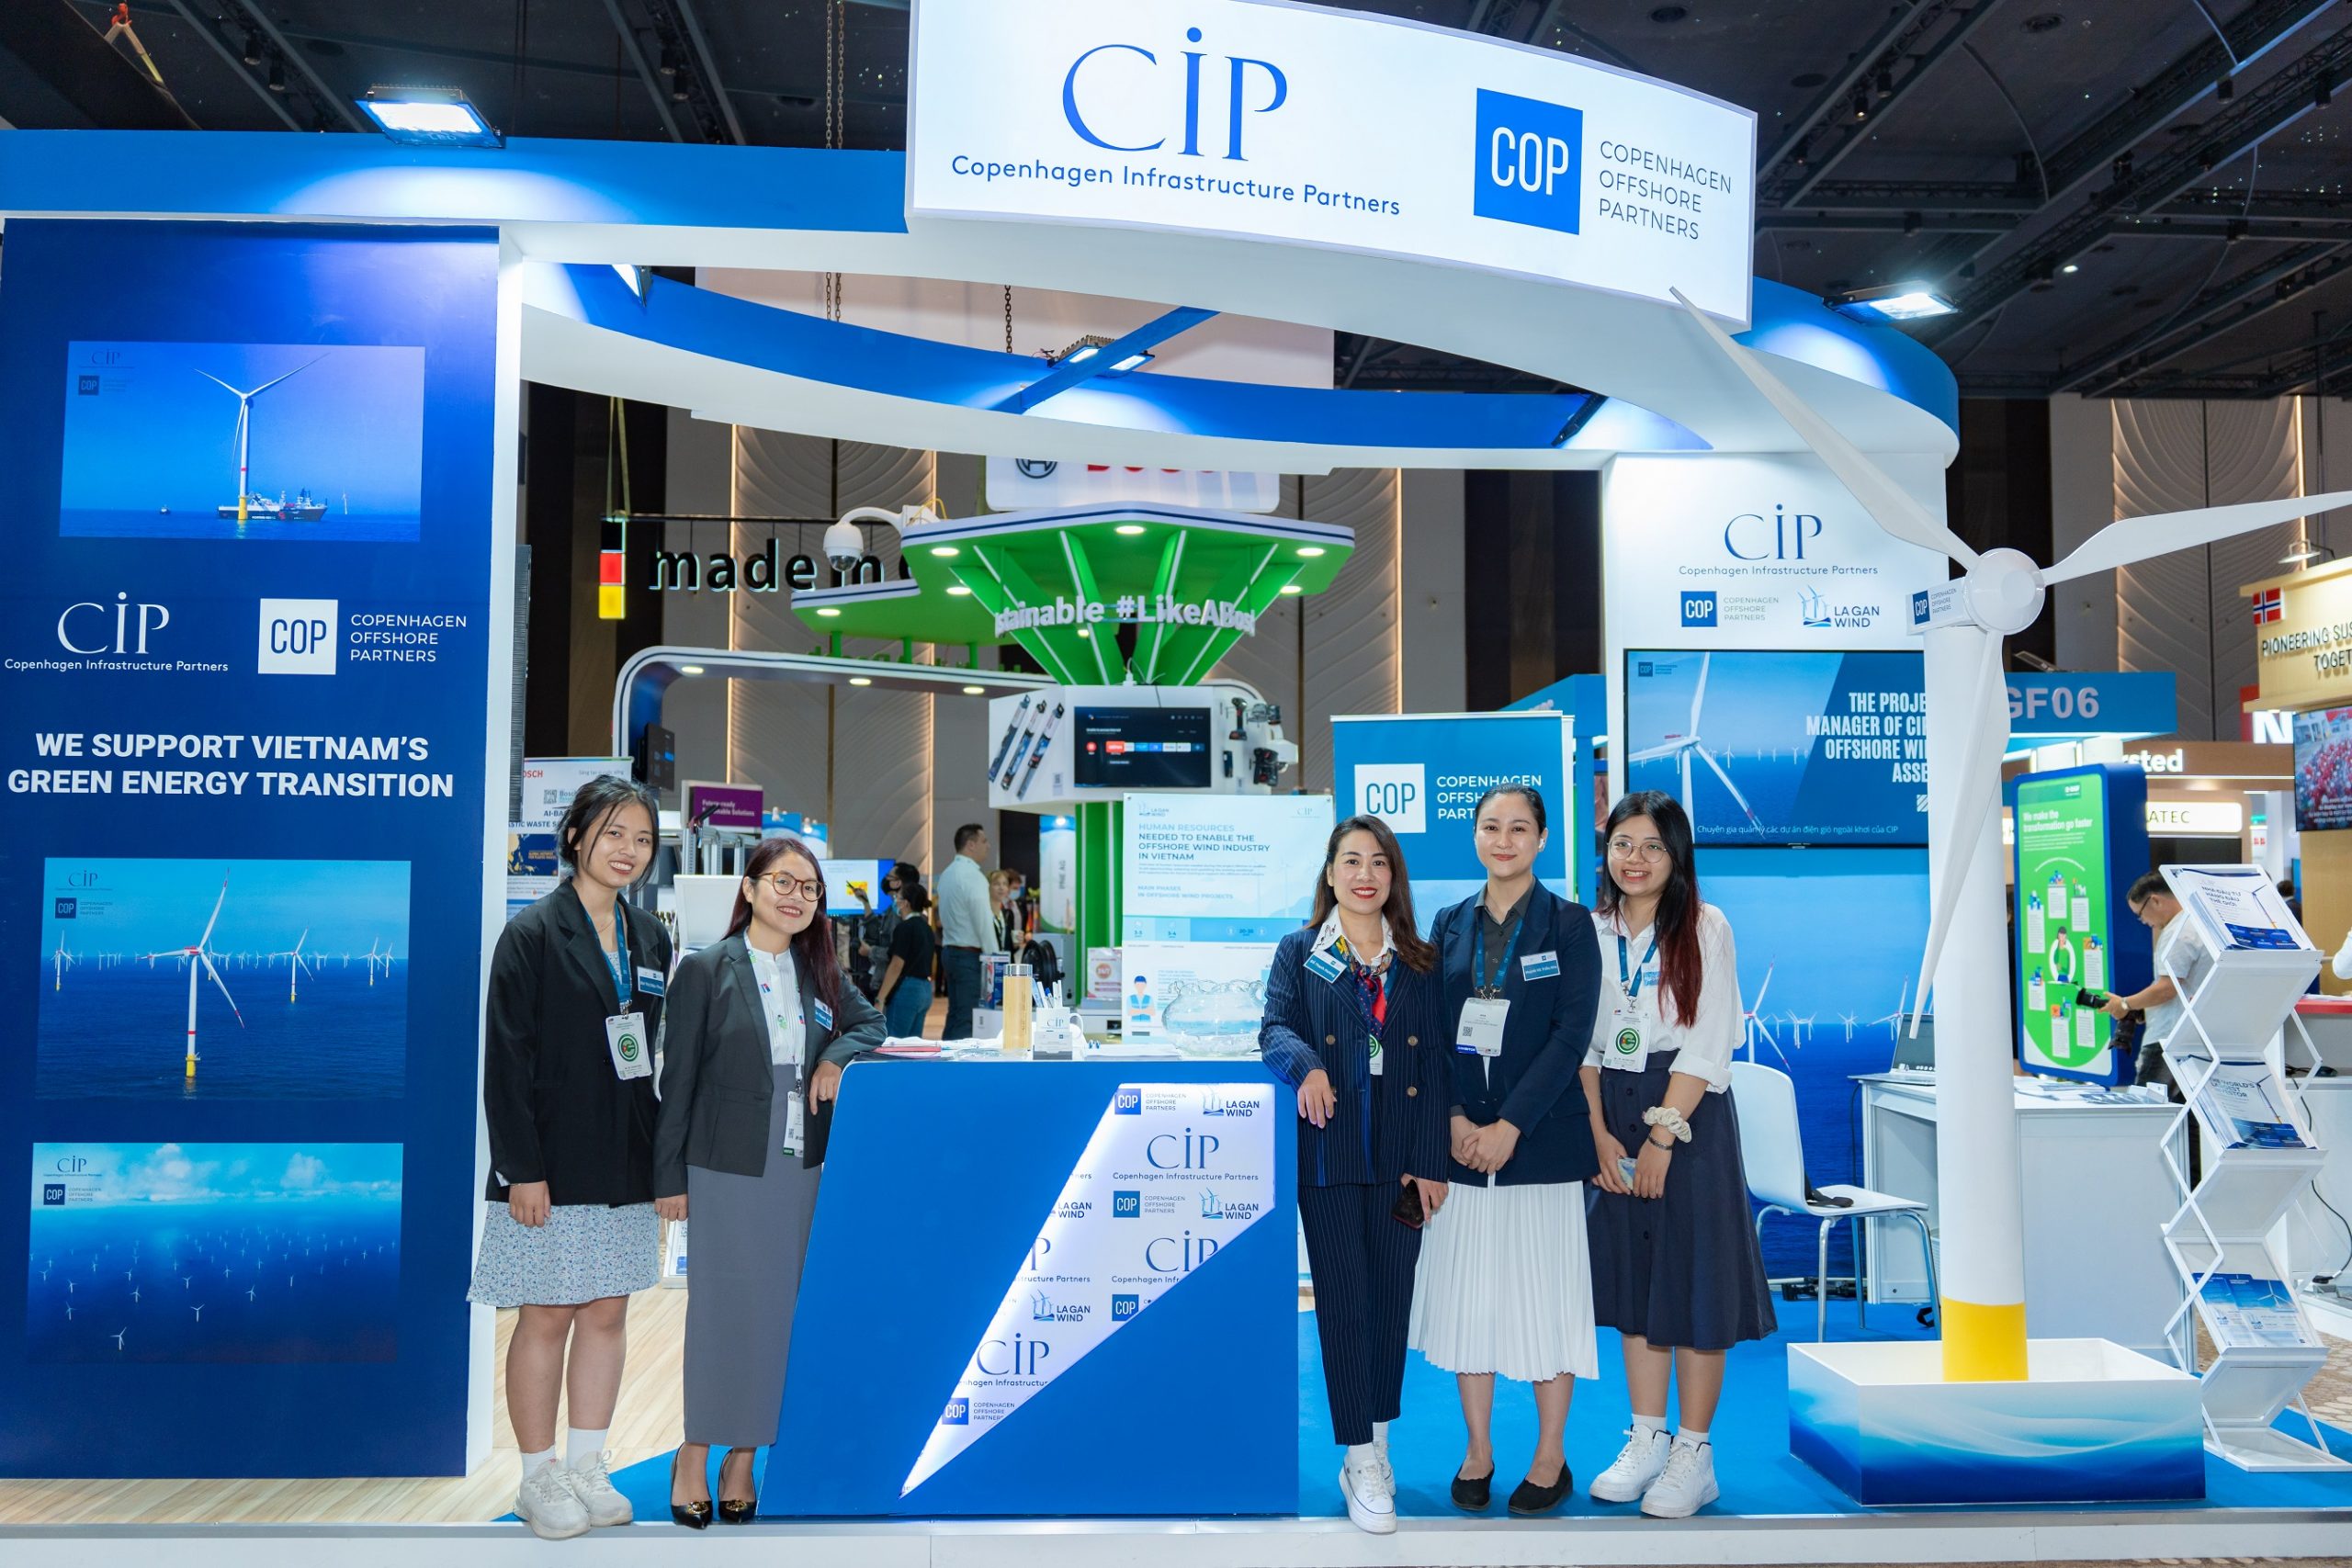 CIP, COP and La Gan Project are featured on media and the look back of our activities at The Green Economy Forum and Exhibition 2022